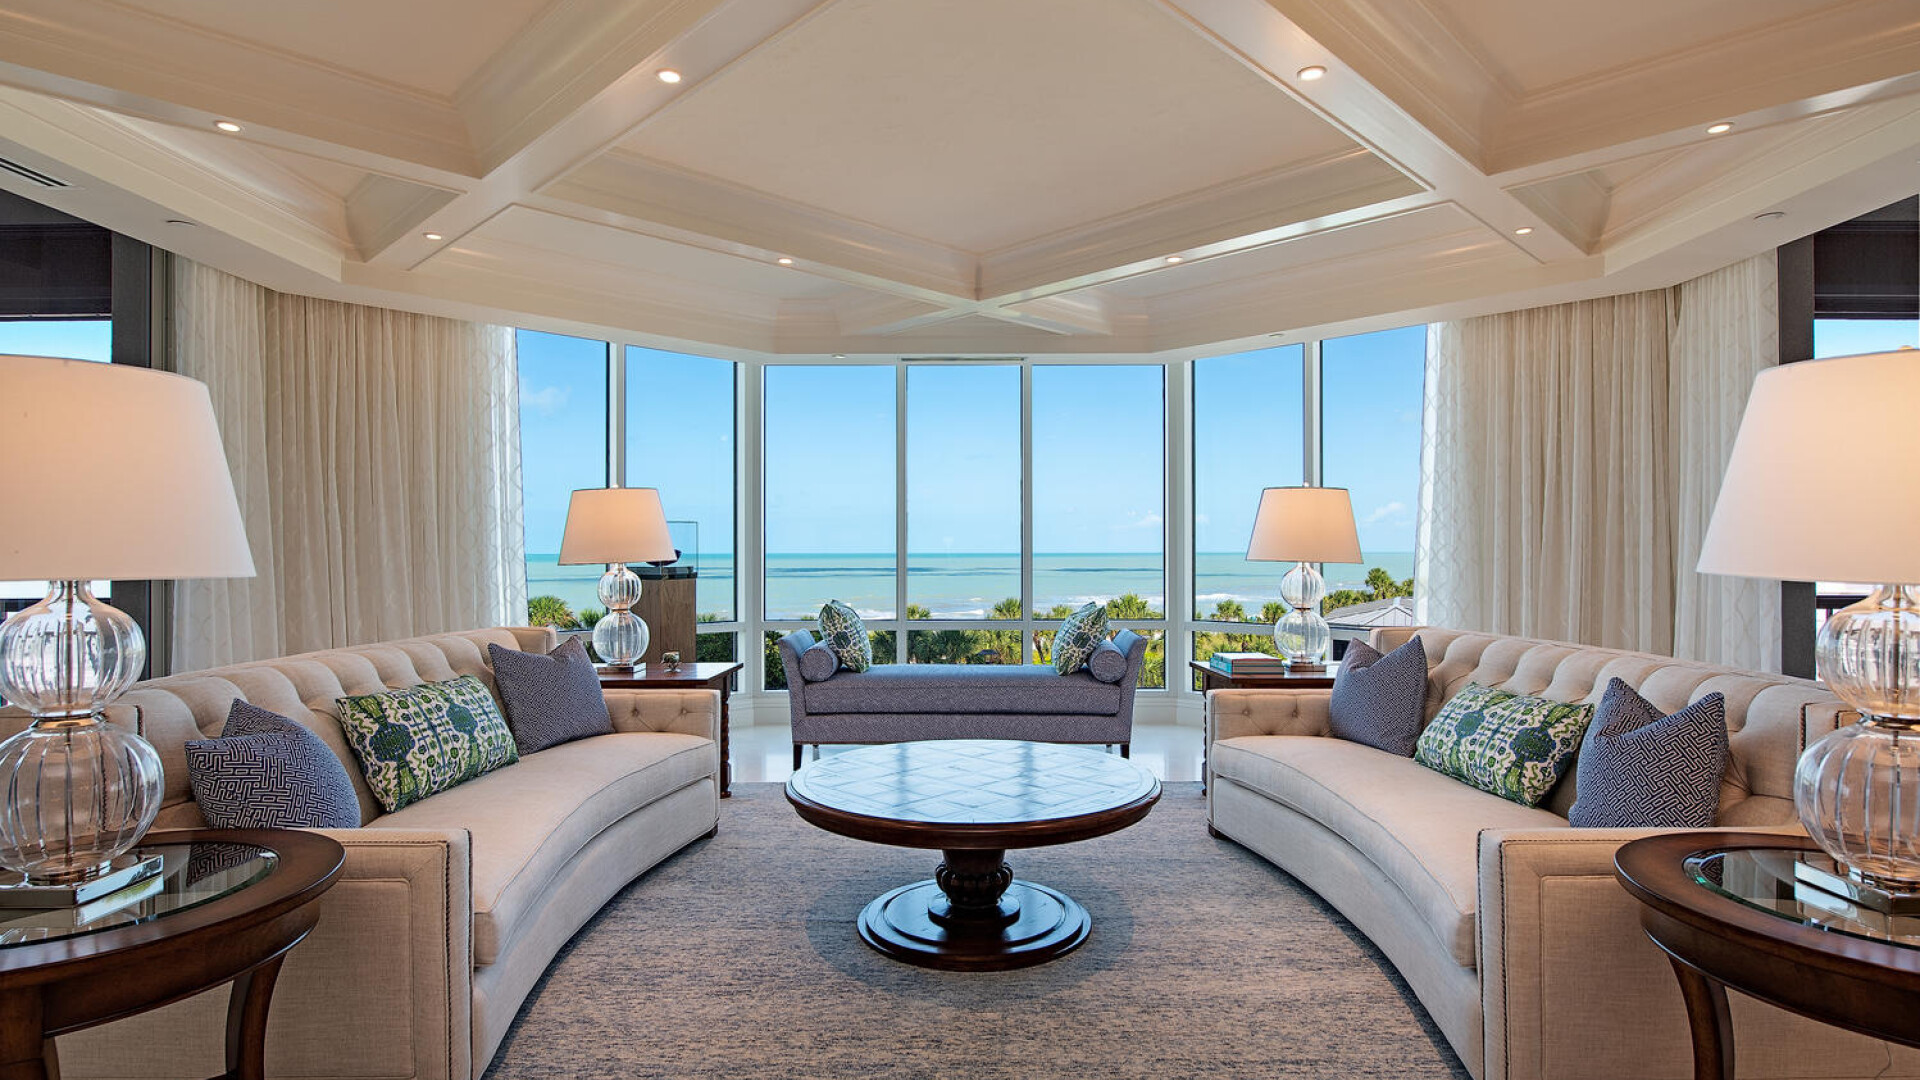 Modern living room with amazing ceiling detail and views of the water, Naples FL